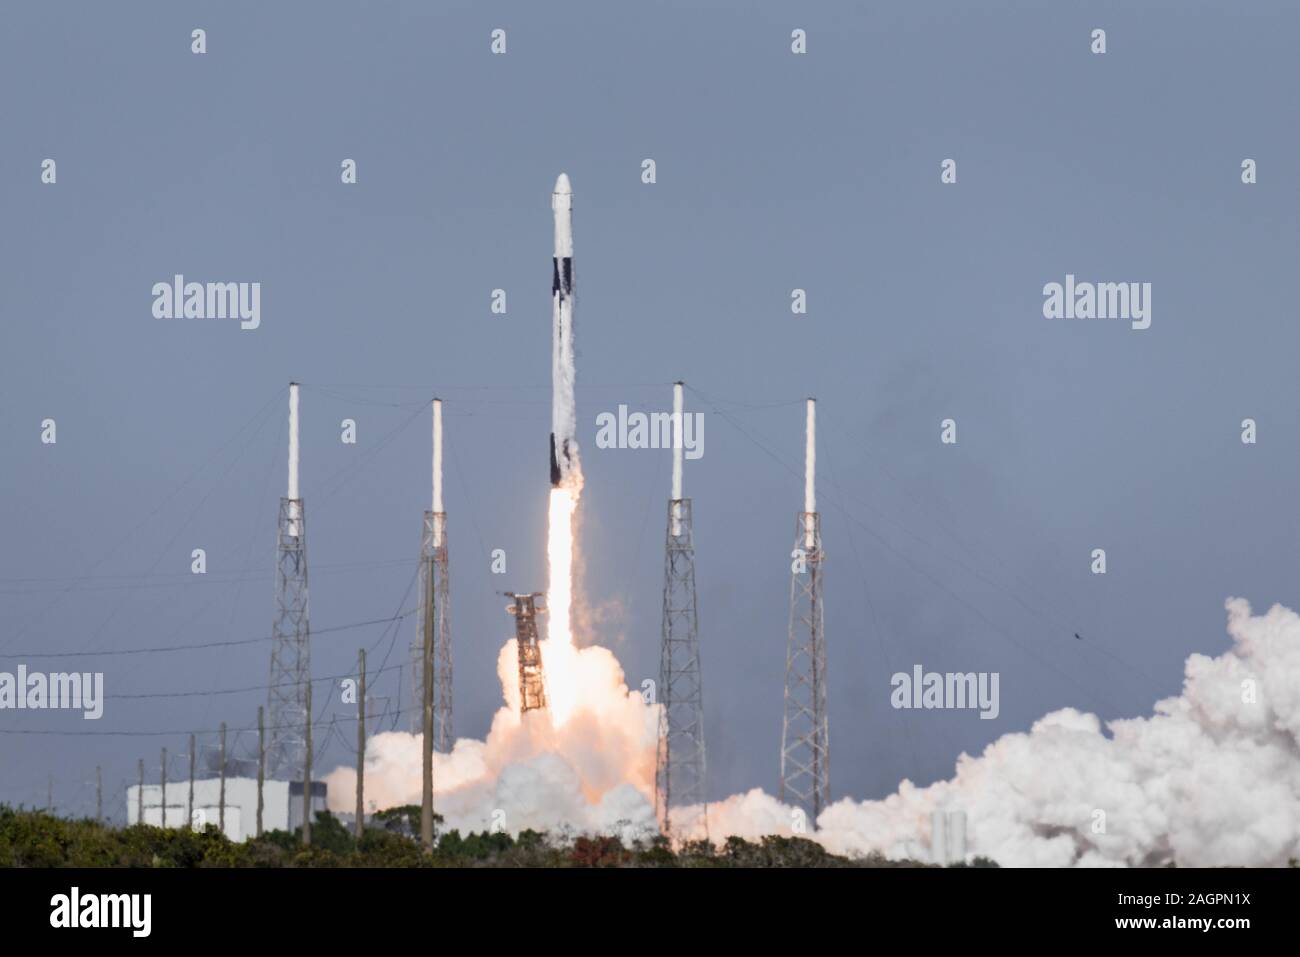 A SpaceX Falcon 9 CRS-19 rocket launched at Cape Canaveral Air Force Station, Florida, Dec. 5, 2019. The CRS-19 is the latest mission in the Commercial Resupply Services program which transports thousands of pounds of cargo and supplies to resupply the International Space Station. (U.S. Air Force photo by Joshua Clifford) Stock Photo